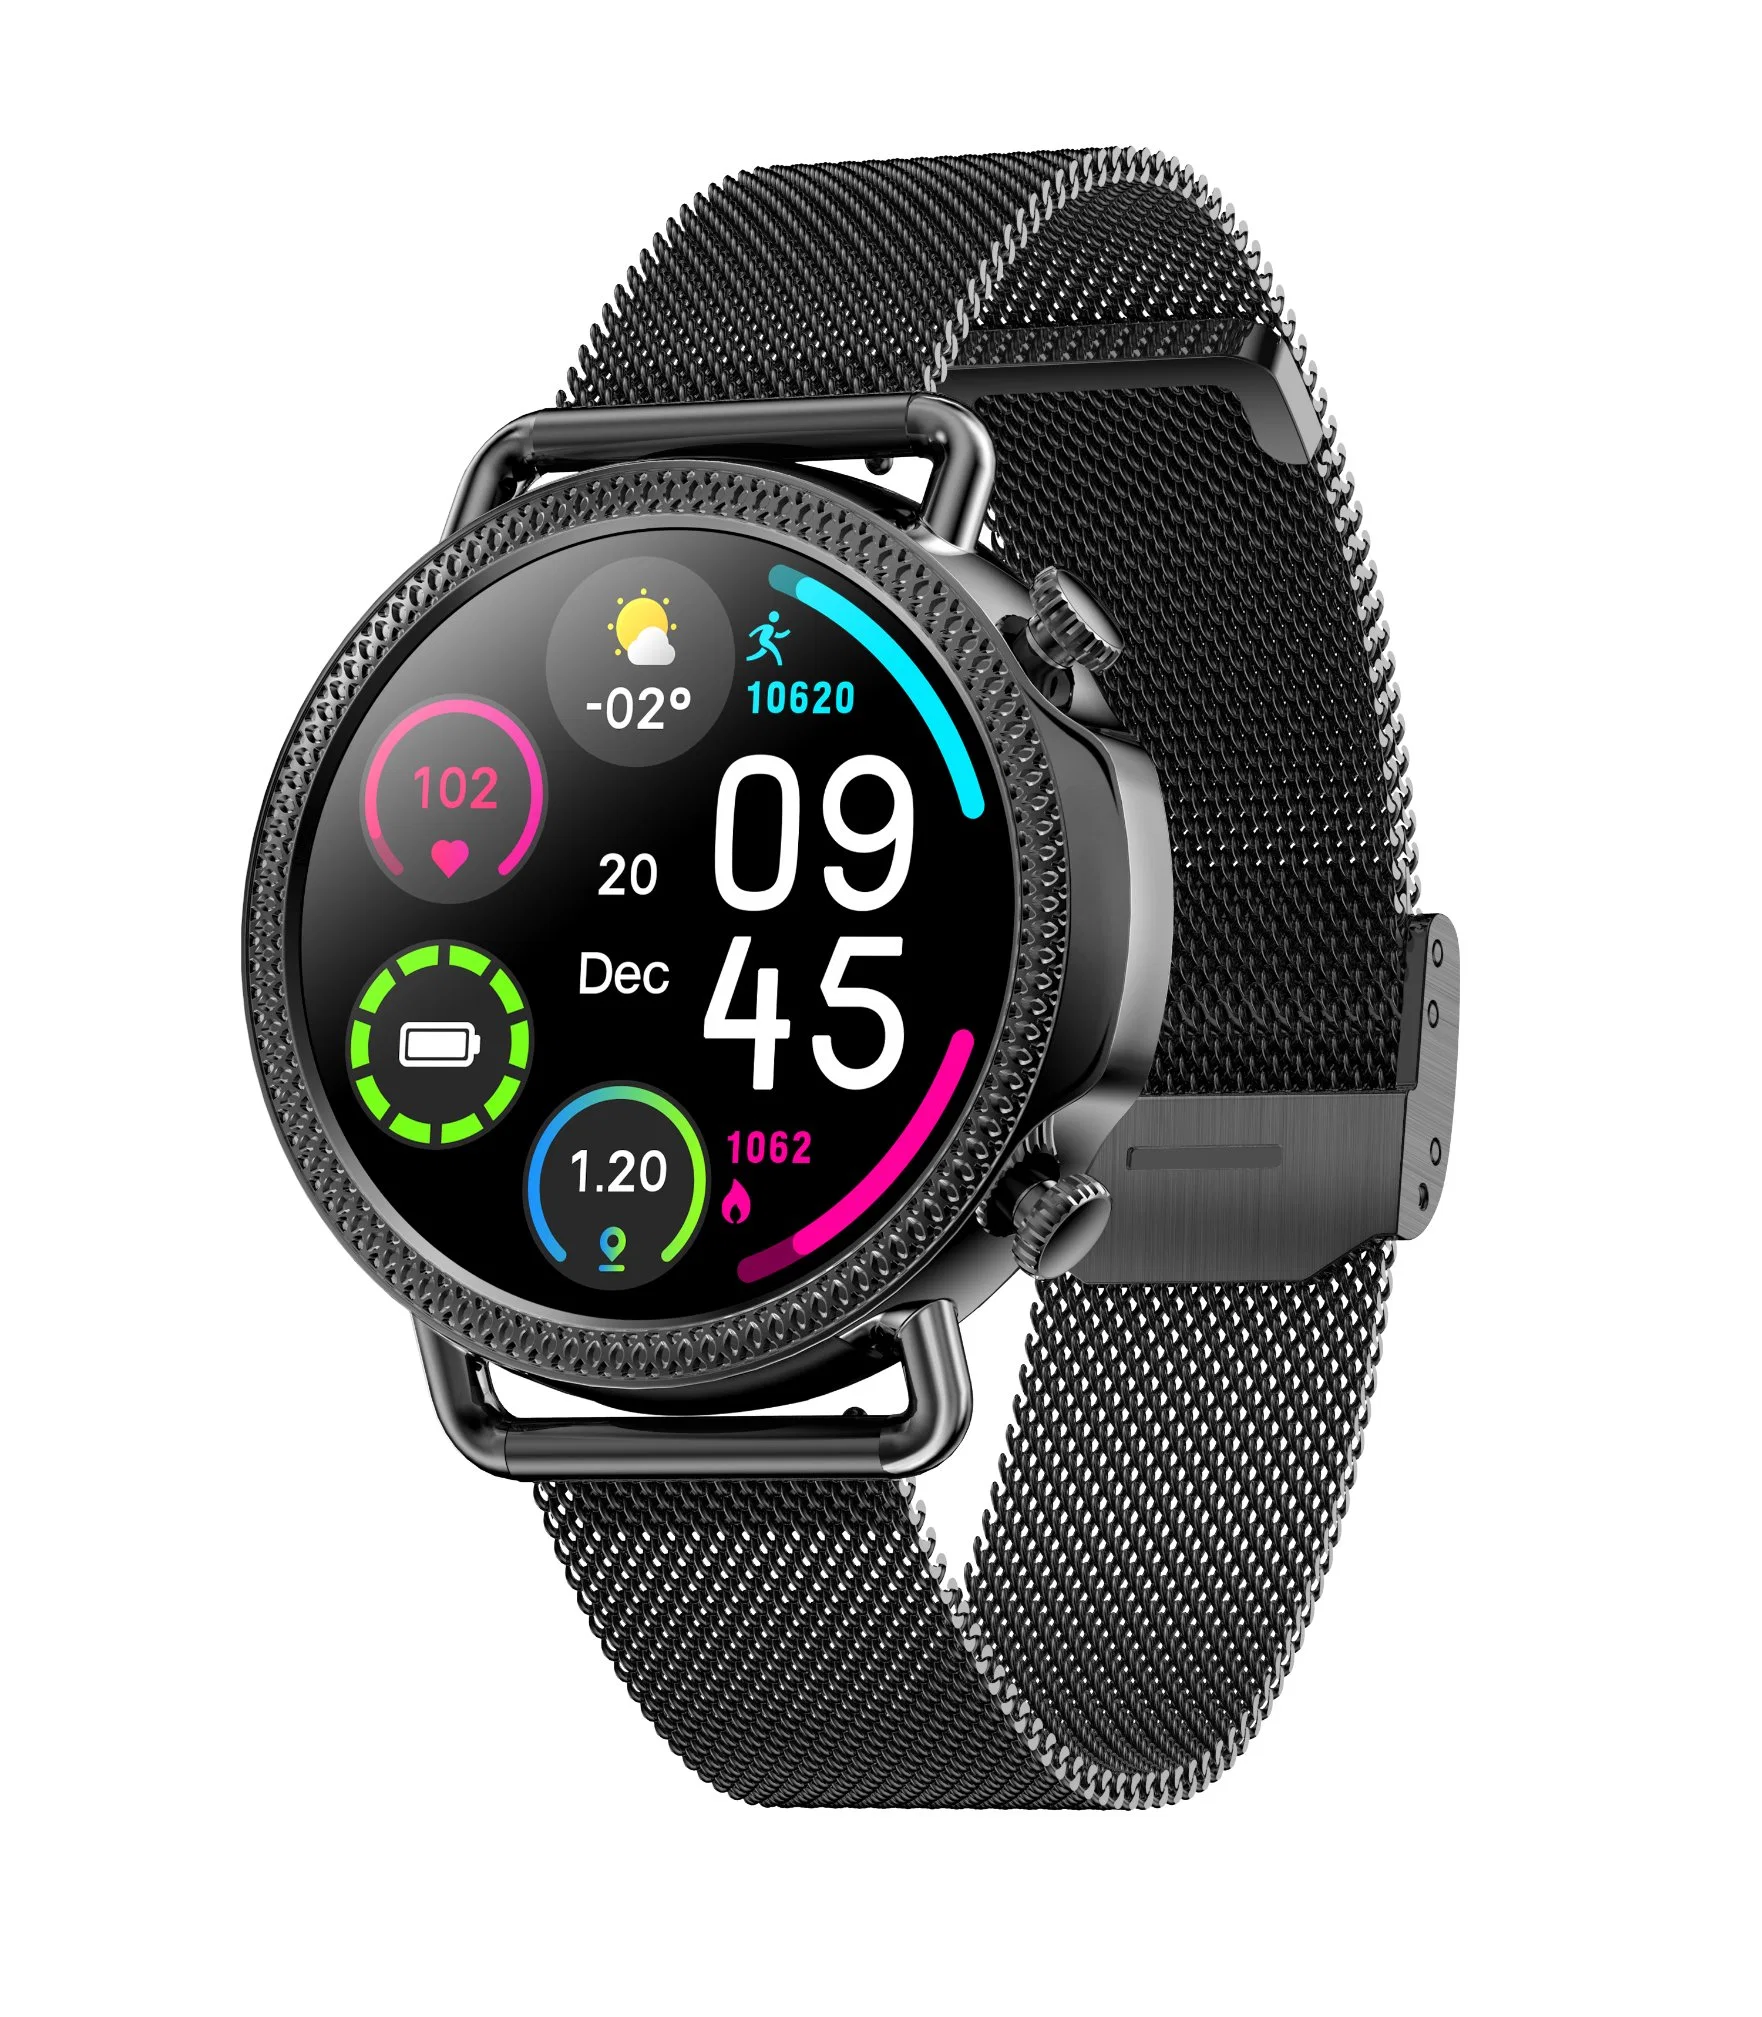 Music Smart Watch OEM Cellular Price Bracelet Call Mobile Phone Wrist Fitness Band Health Monitor Sport Smart Watch